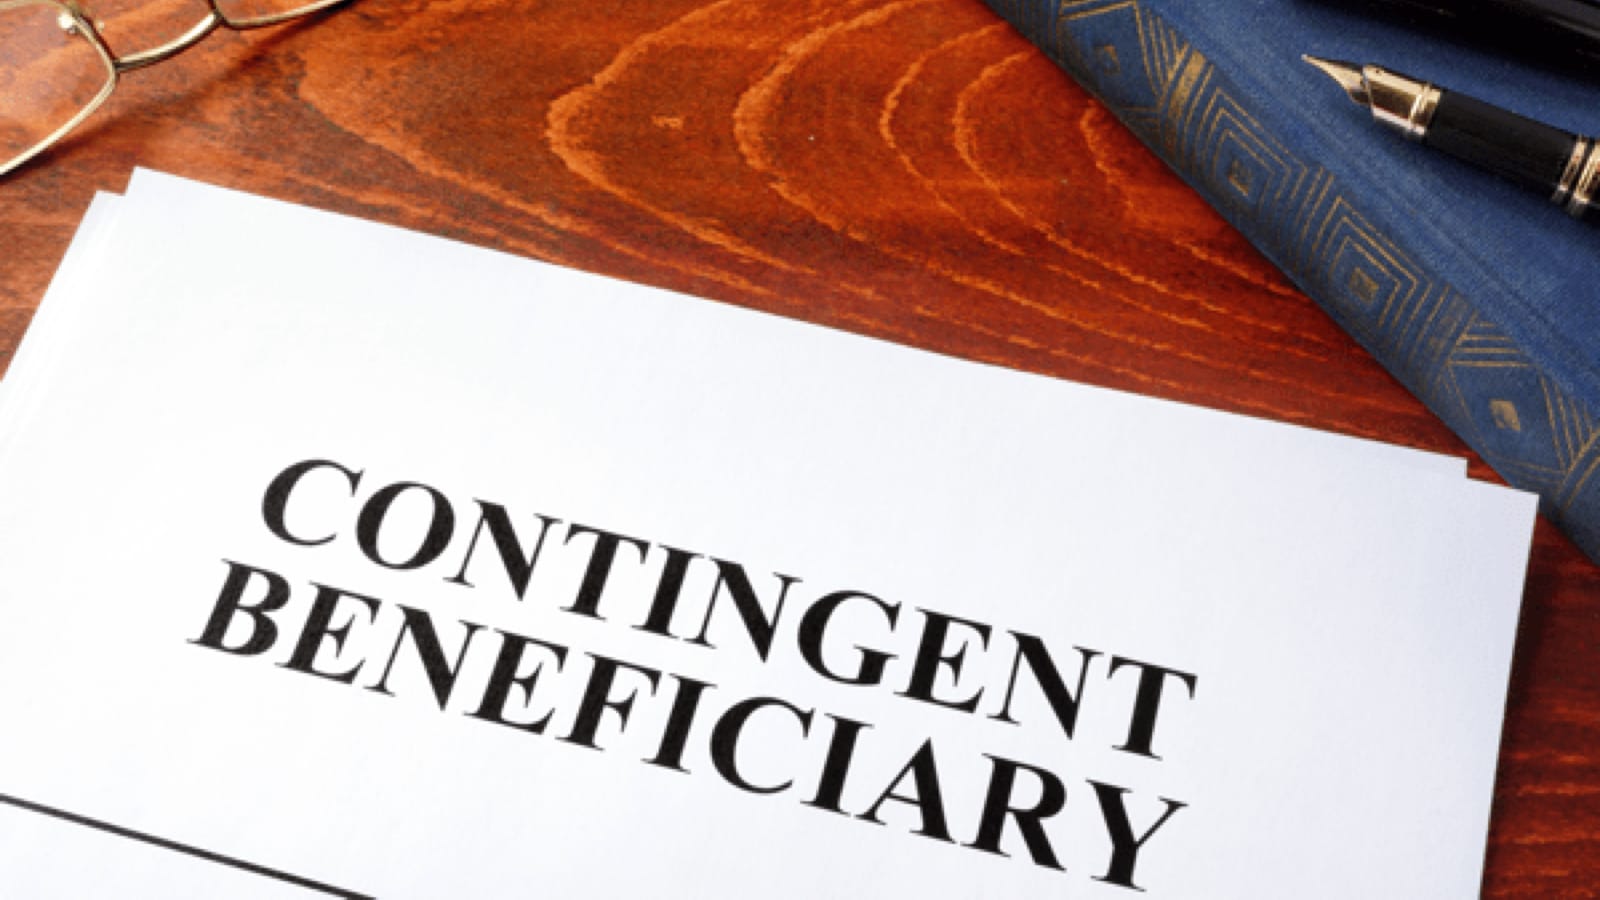 Contingent beneficiary documents